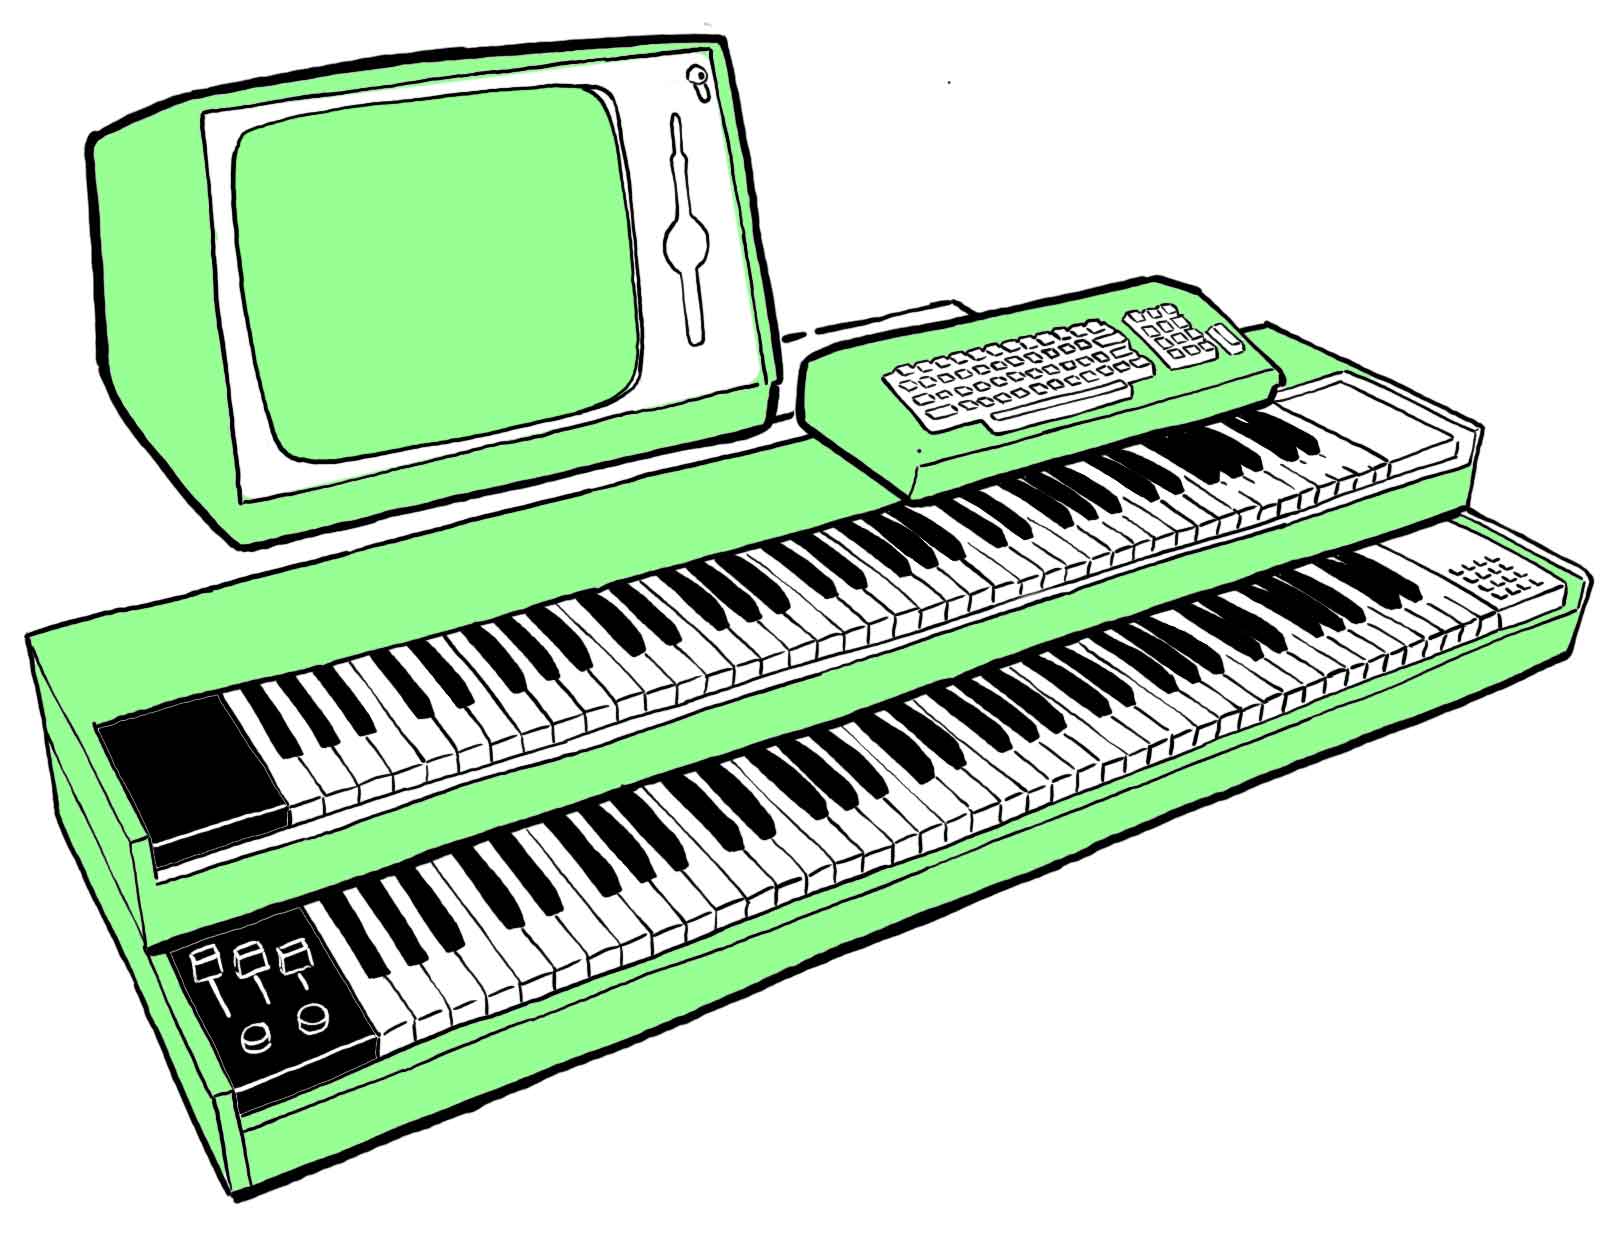 Drawing of the Fairlight CMI system